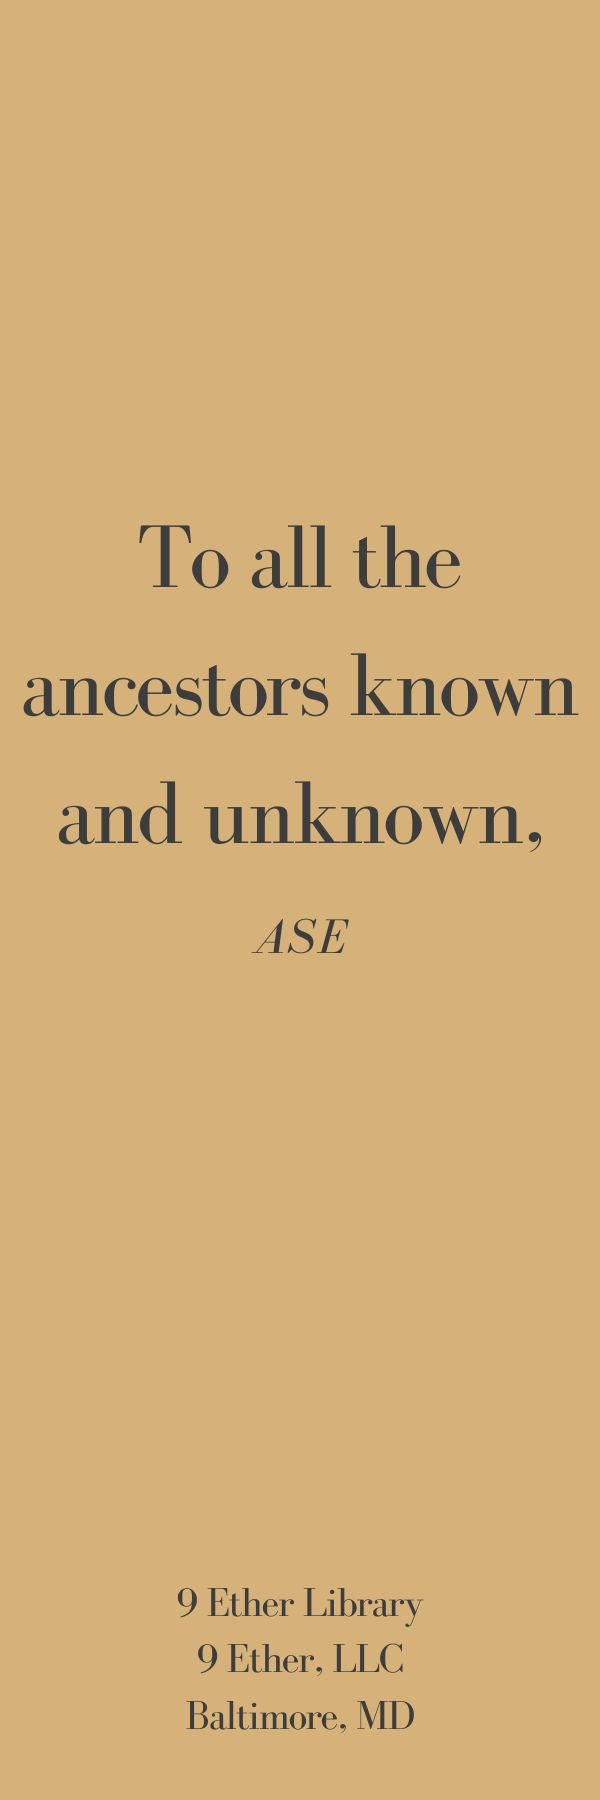 To all the ancestors known and unknown, Ase.